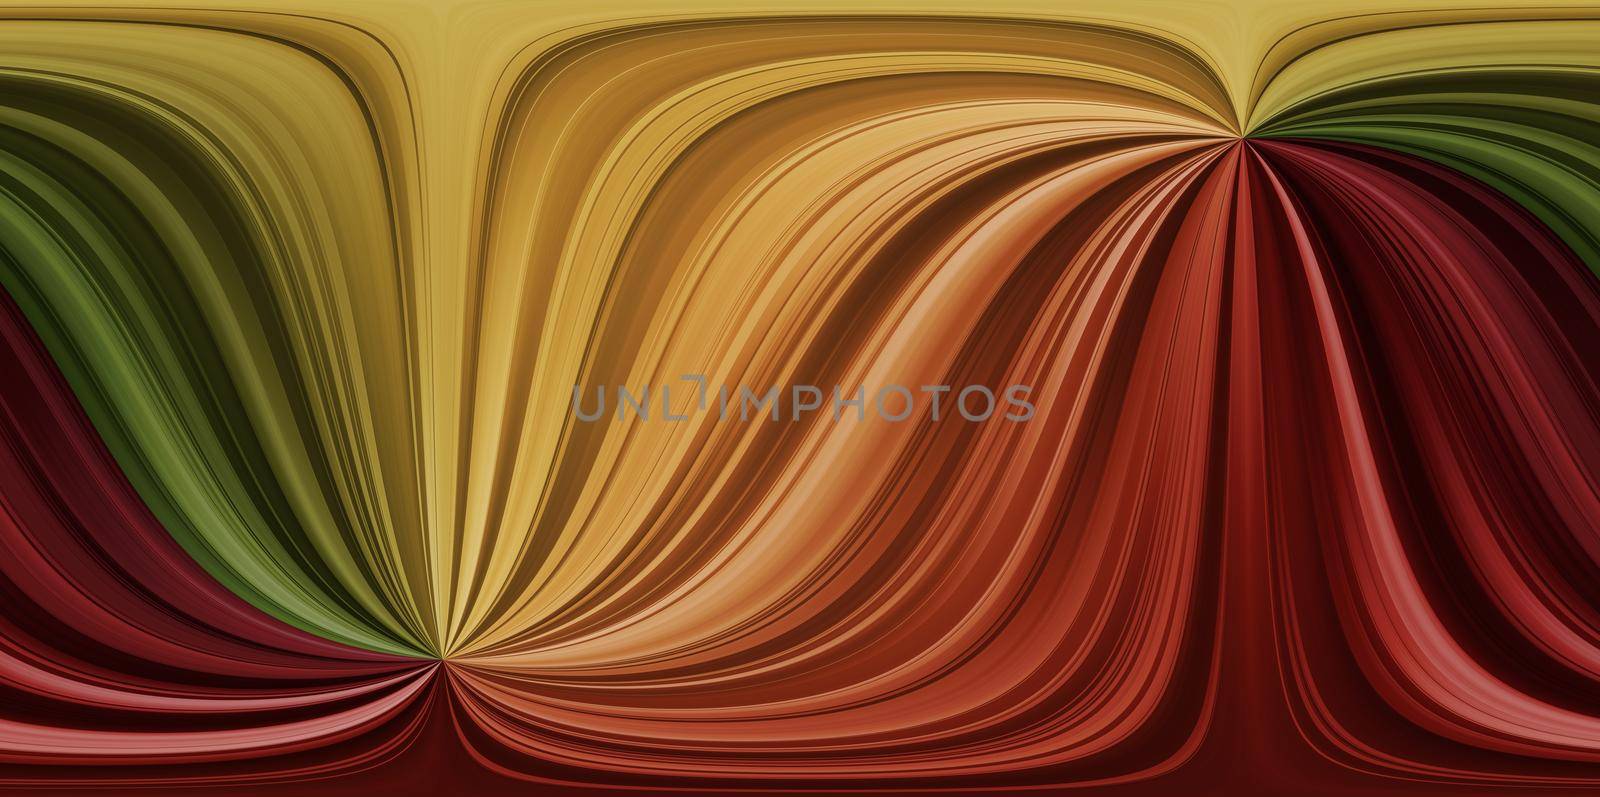 Red, orange, yellow, green curved lines, abstract seamless background